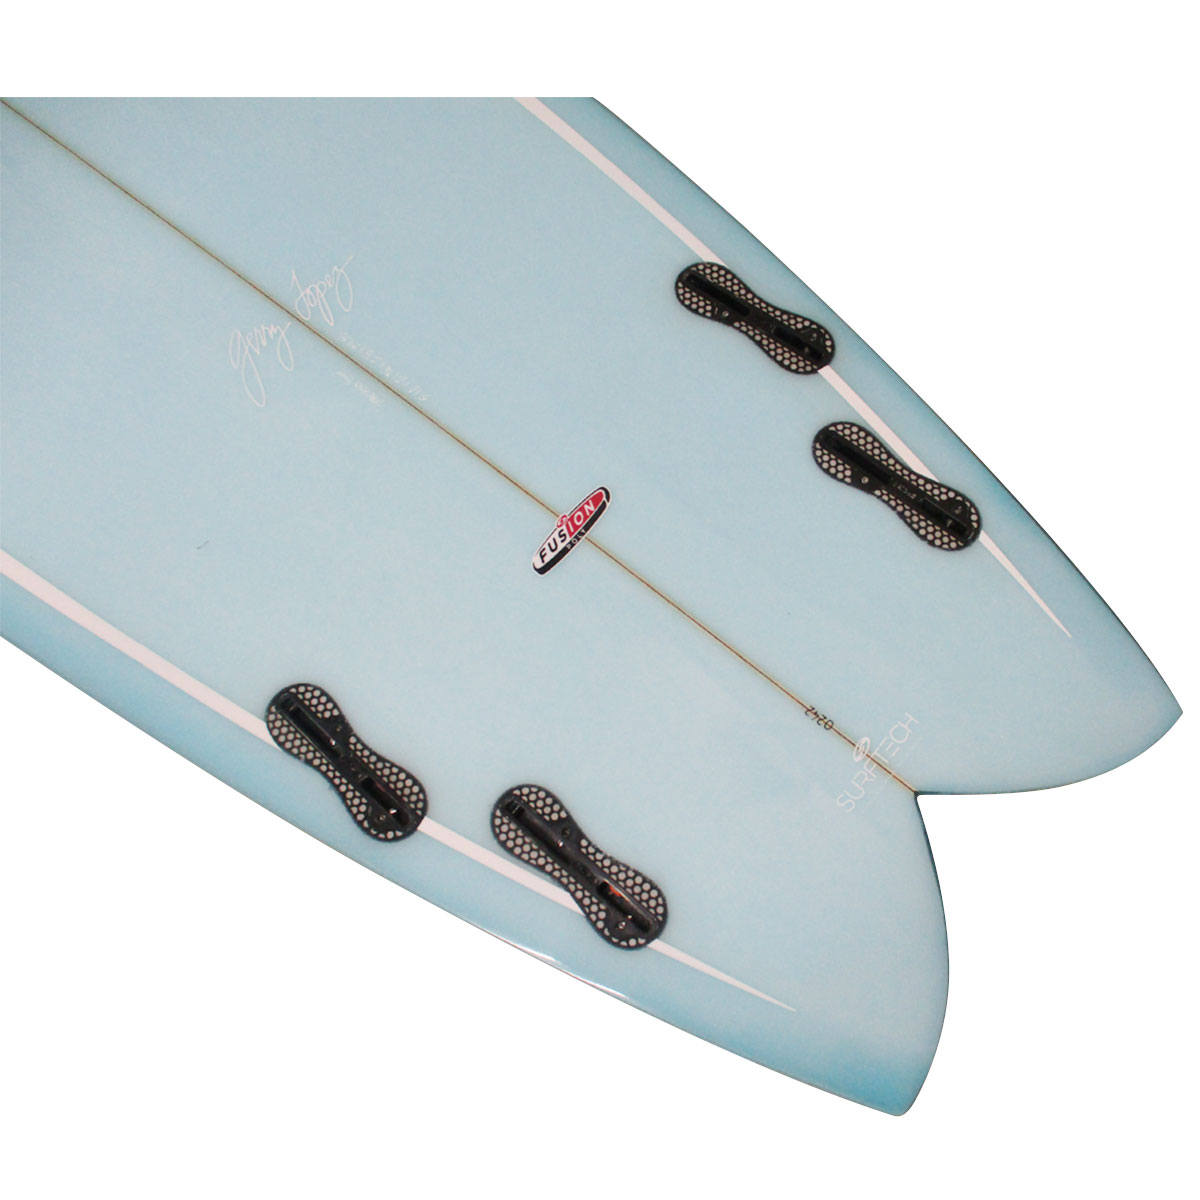 GERRY LOPEZ / SOMETHING FISHY 5`10 SURFTECH FUSION POLY